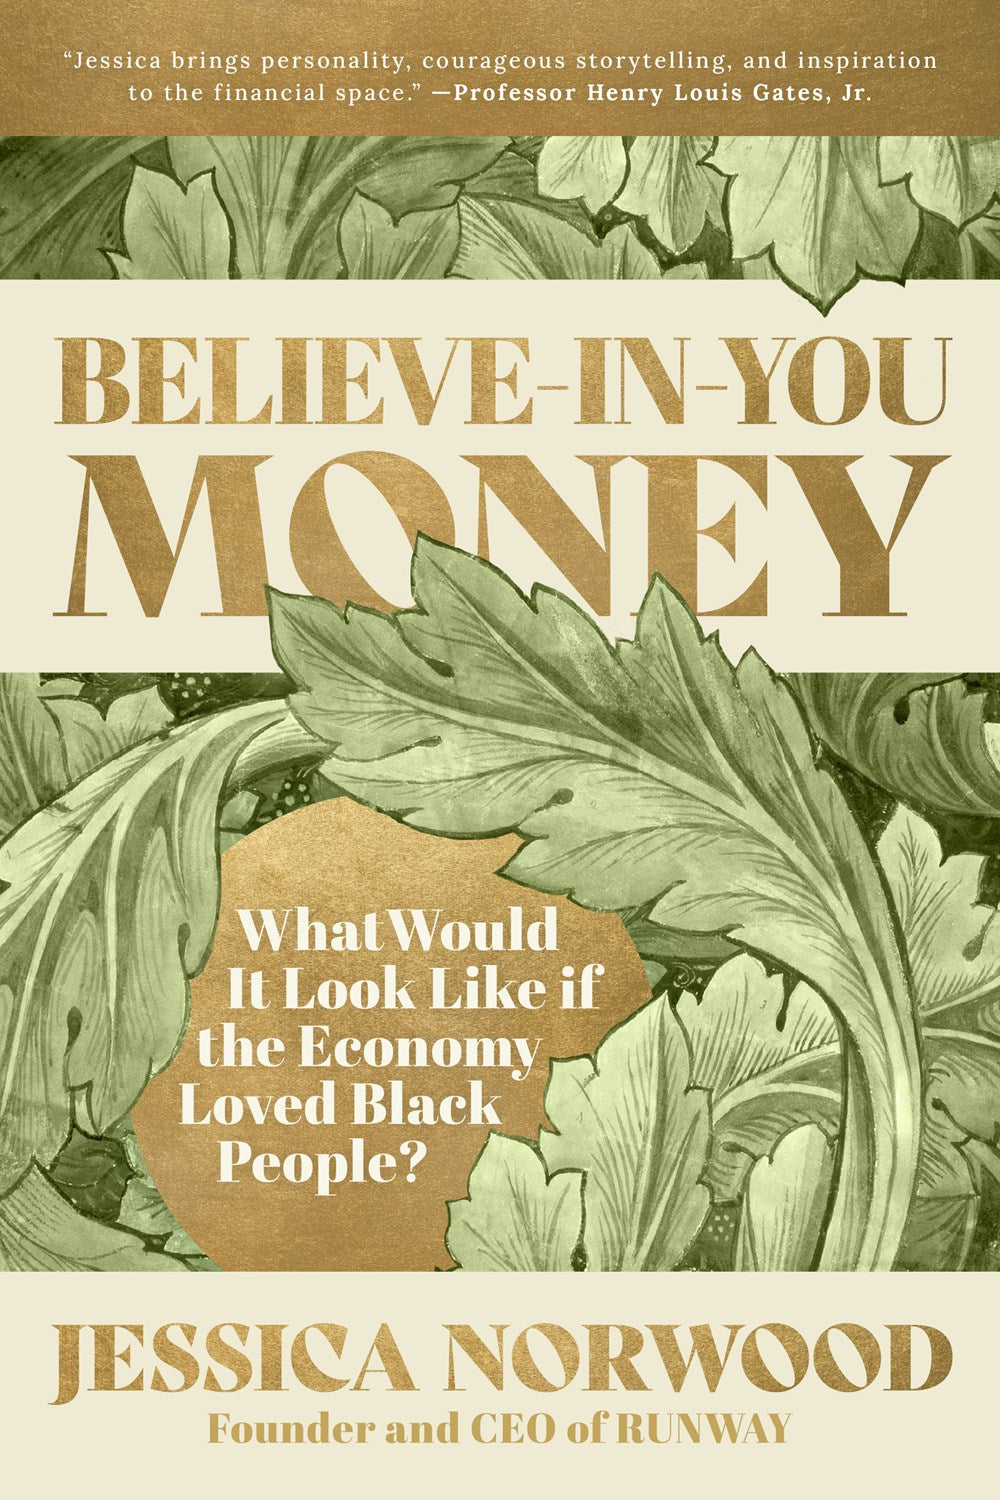 Believe-in-You Money: What Would It Look Like If the Economy Loved Black People?